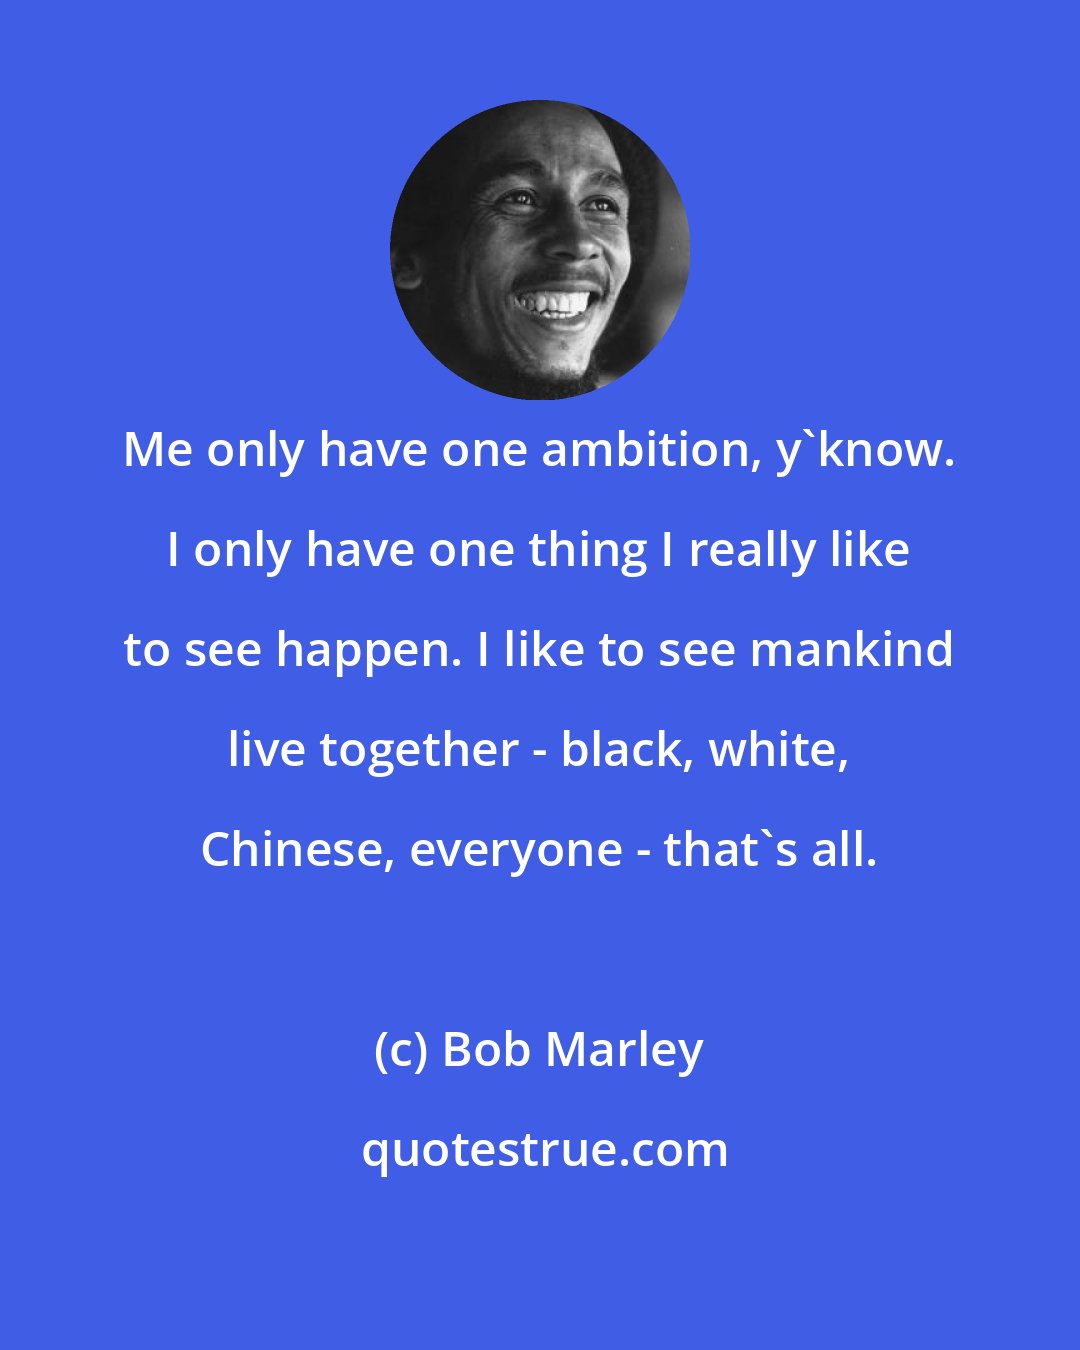 Bob Marley: Me only have one ambition, y'know. I only have one thing I really like to see happen. I like to see mankind live together - black, white, Chinese, everyone - that's all.